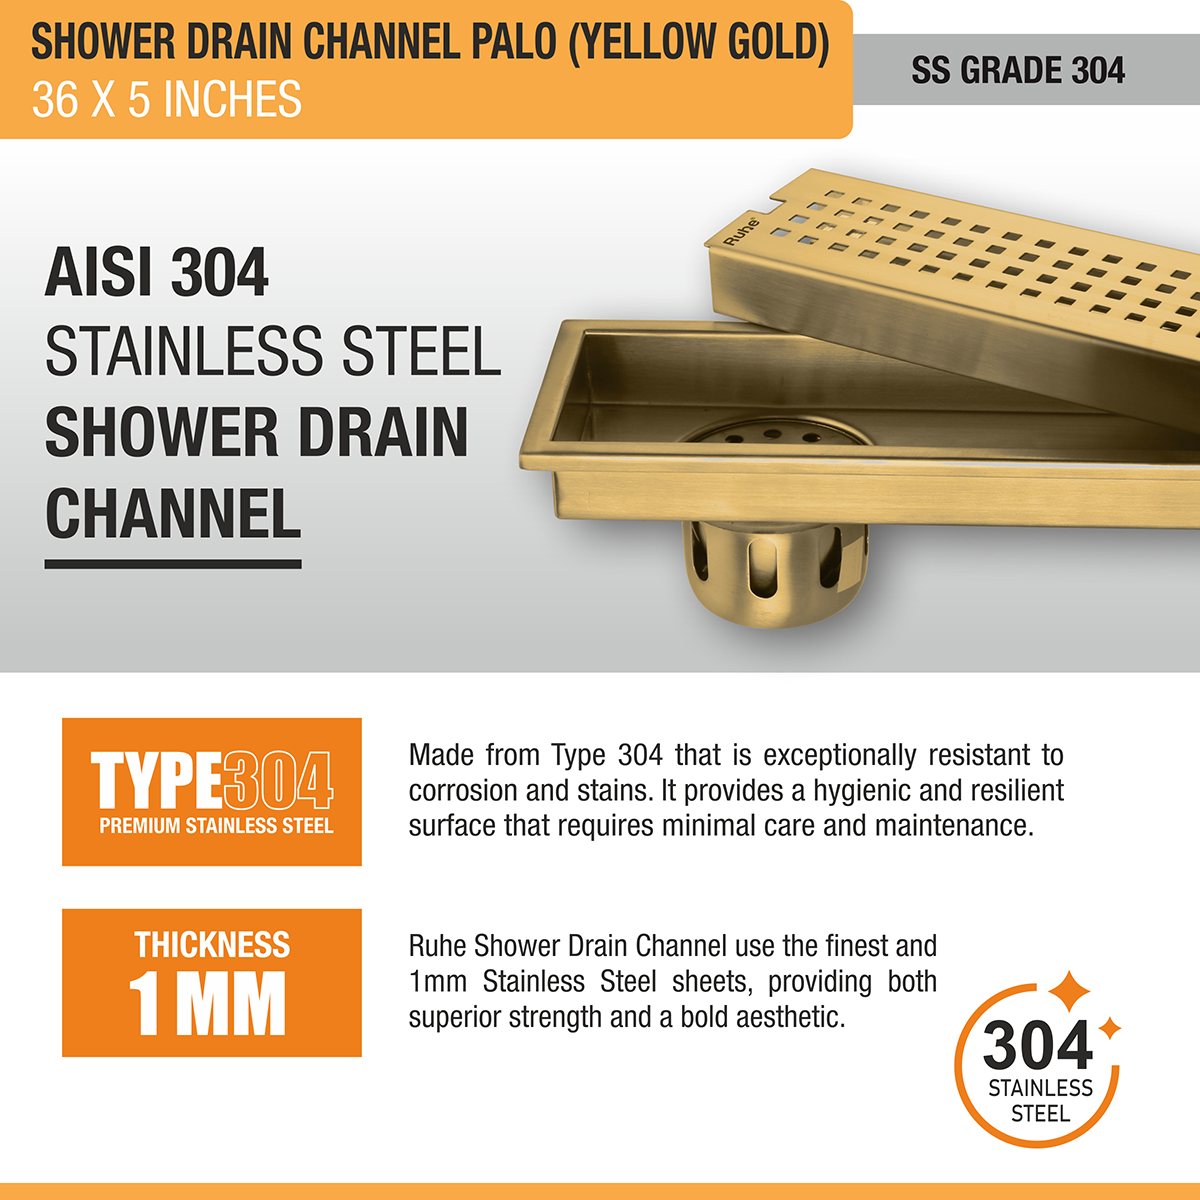 Palo Shower Drain Channel (36 x 5 Inches) YELLOW GOLD stainless steel